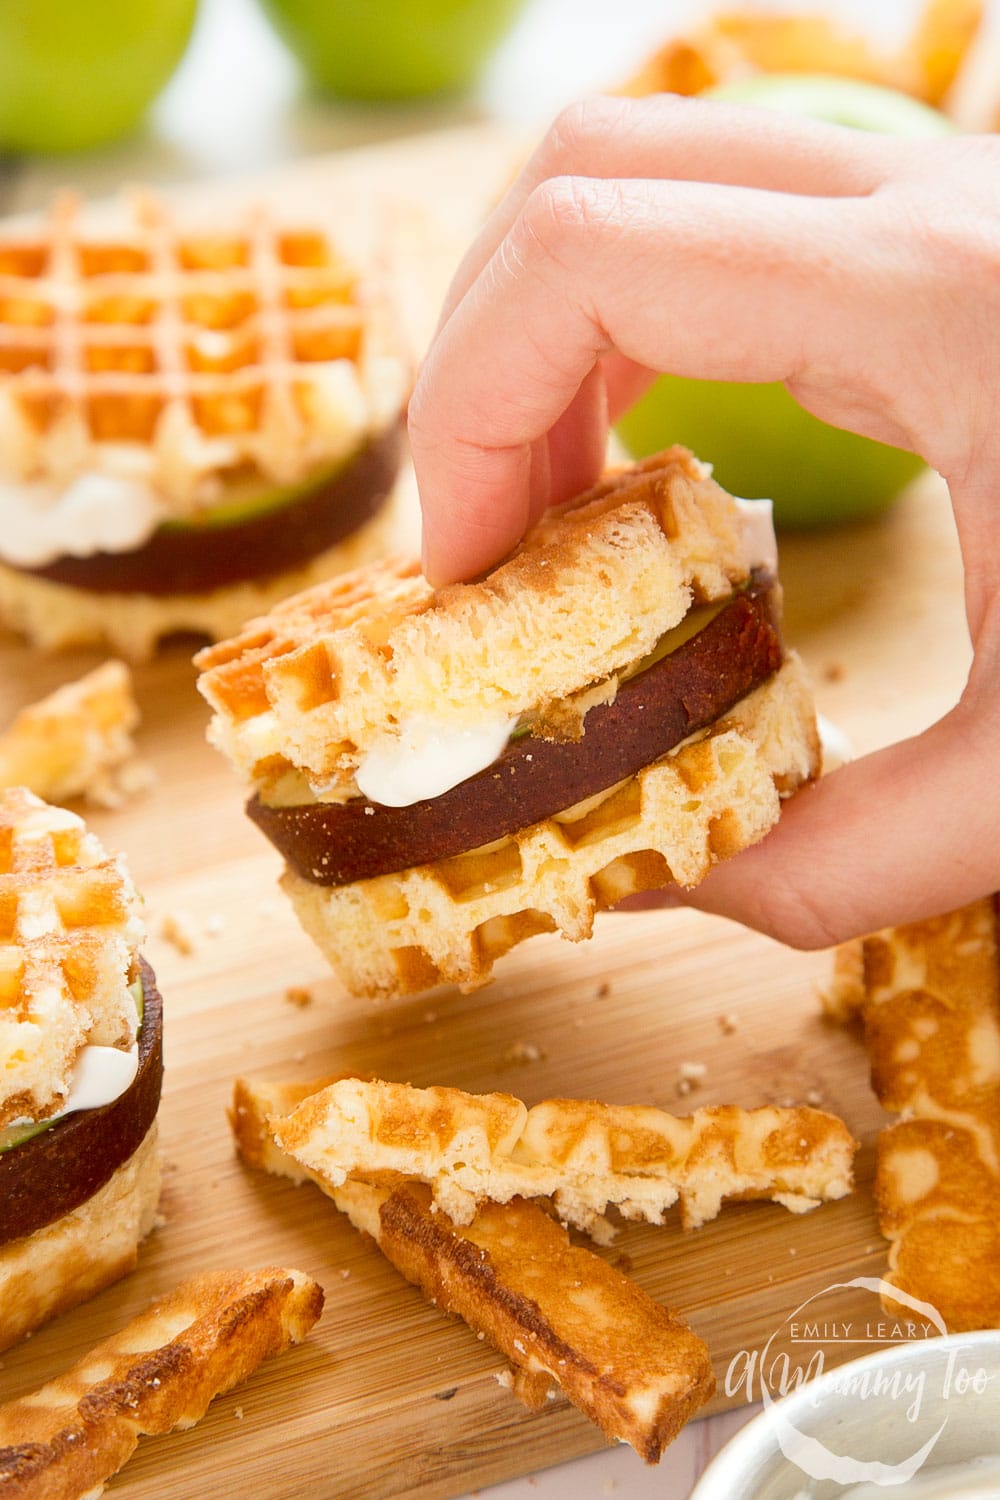 Fun, sweet and delicious waffle apple burgers - a great dessert that's fruity, kid friendly and gluten free